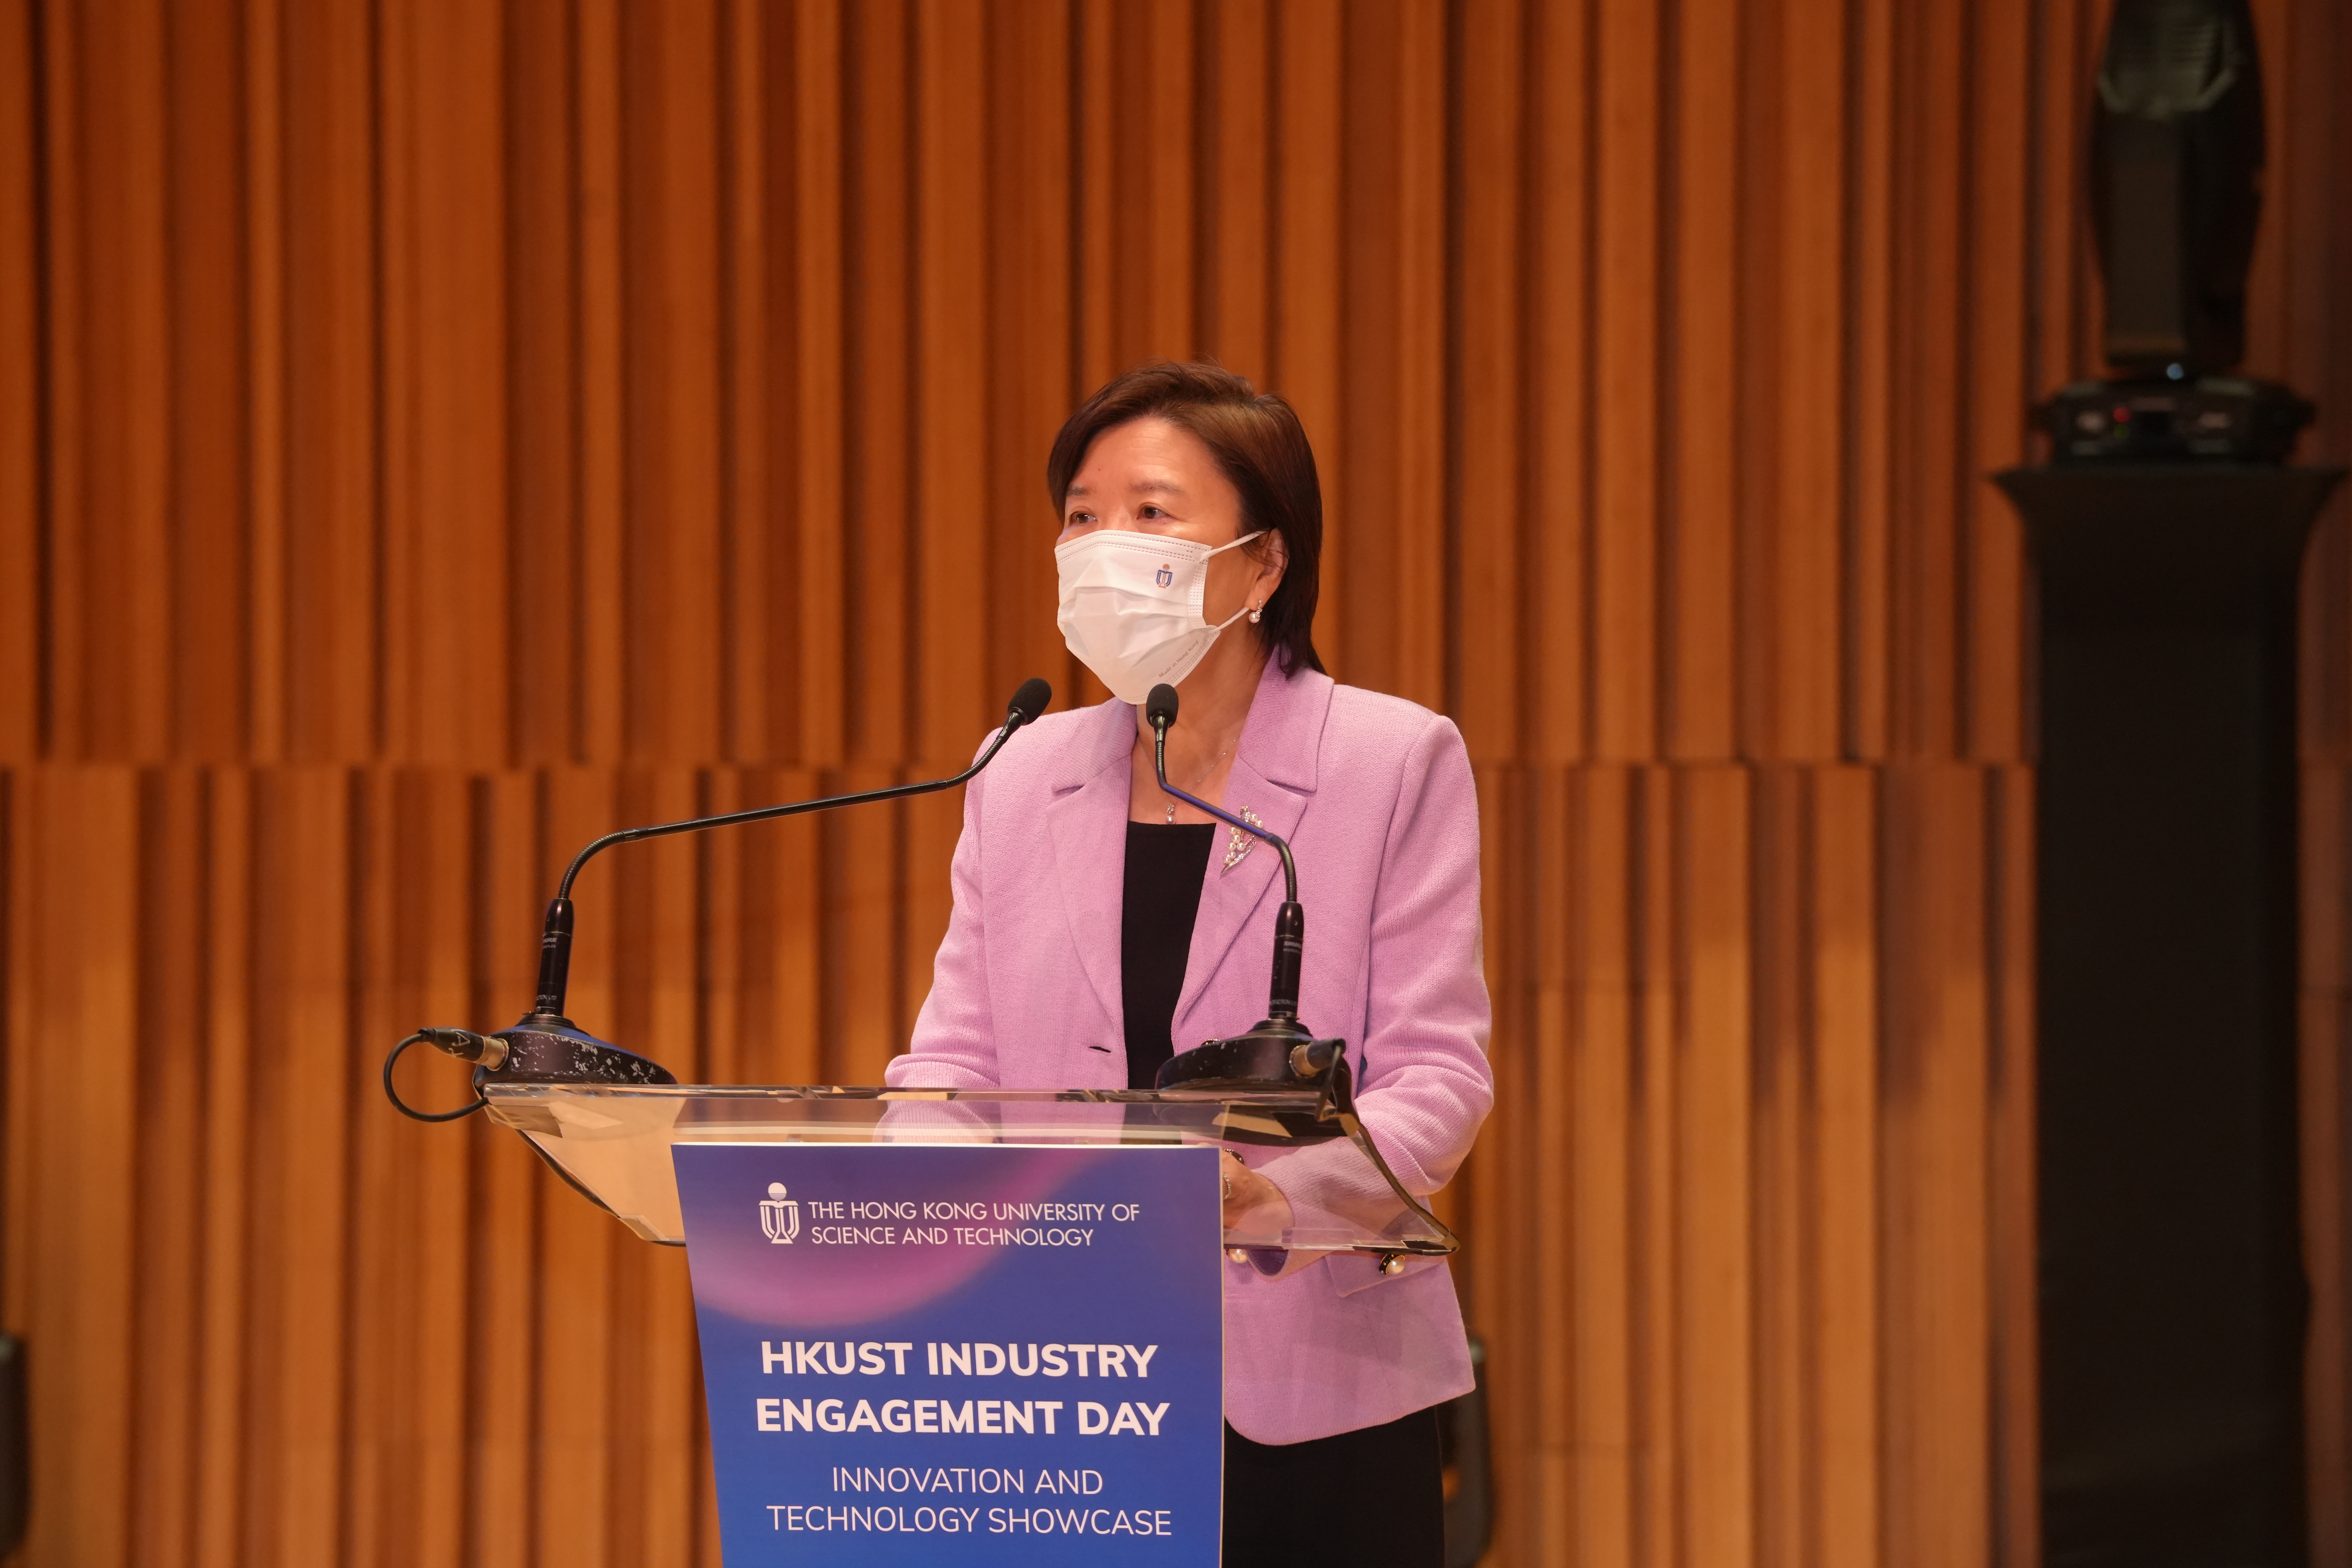 HKUST President Prof. Nancy IP delivers the opening speech at the session